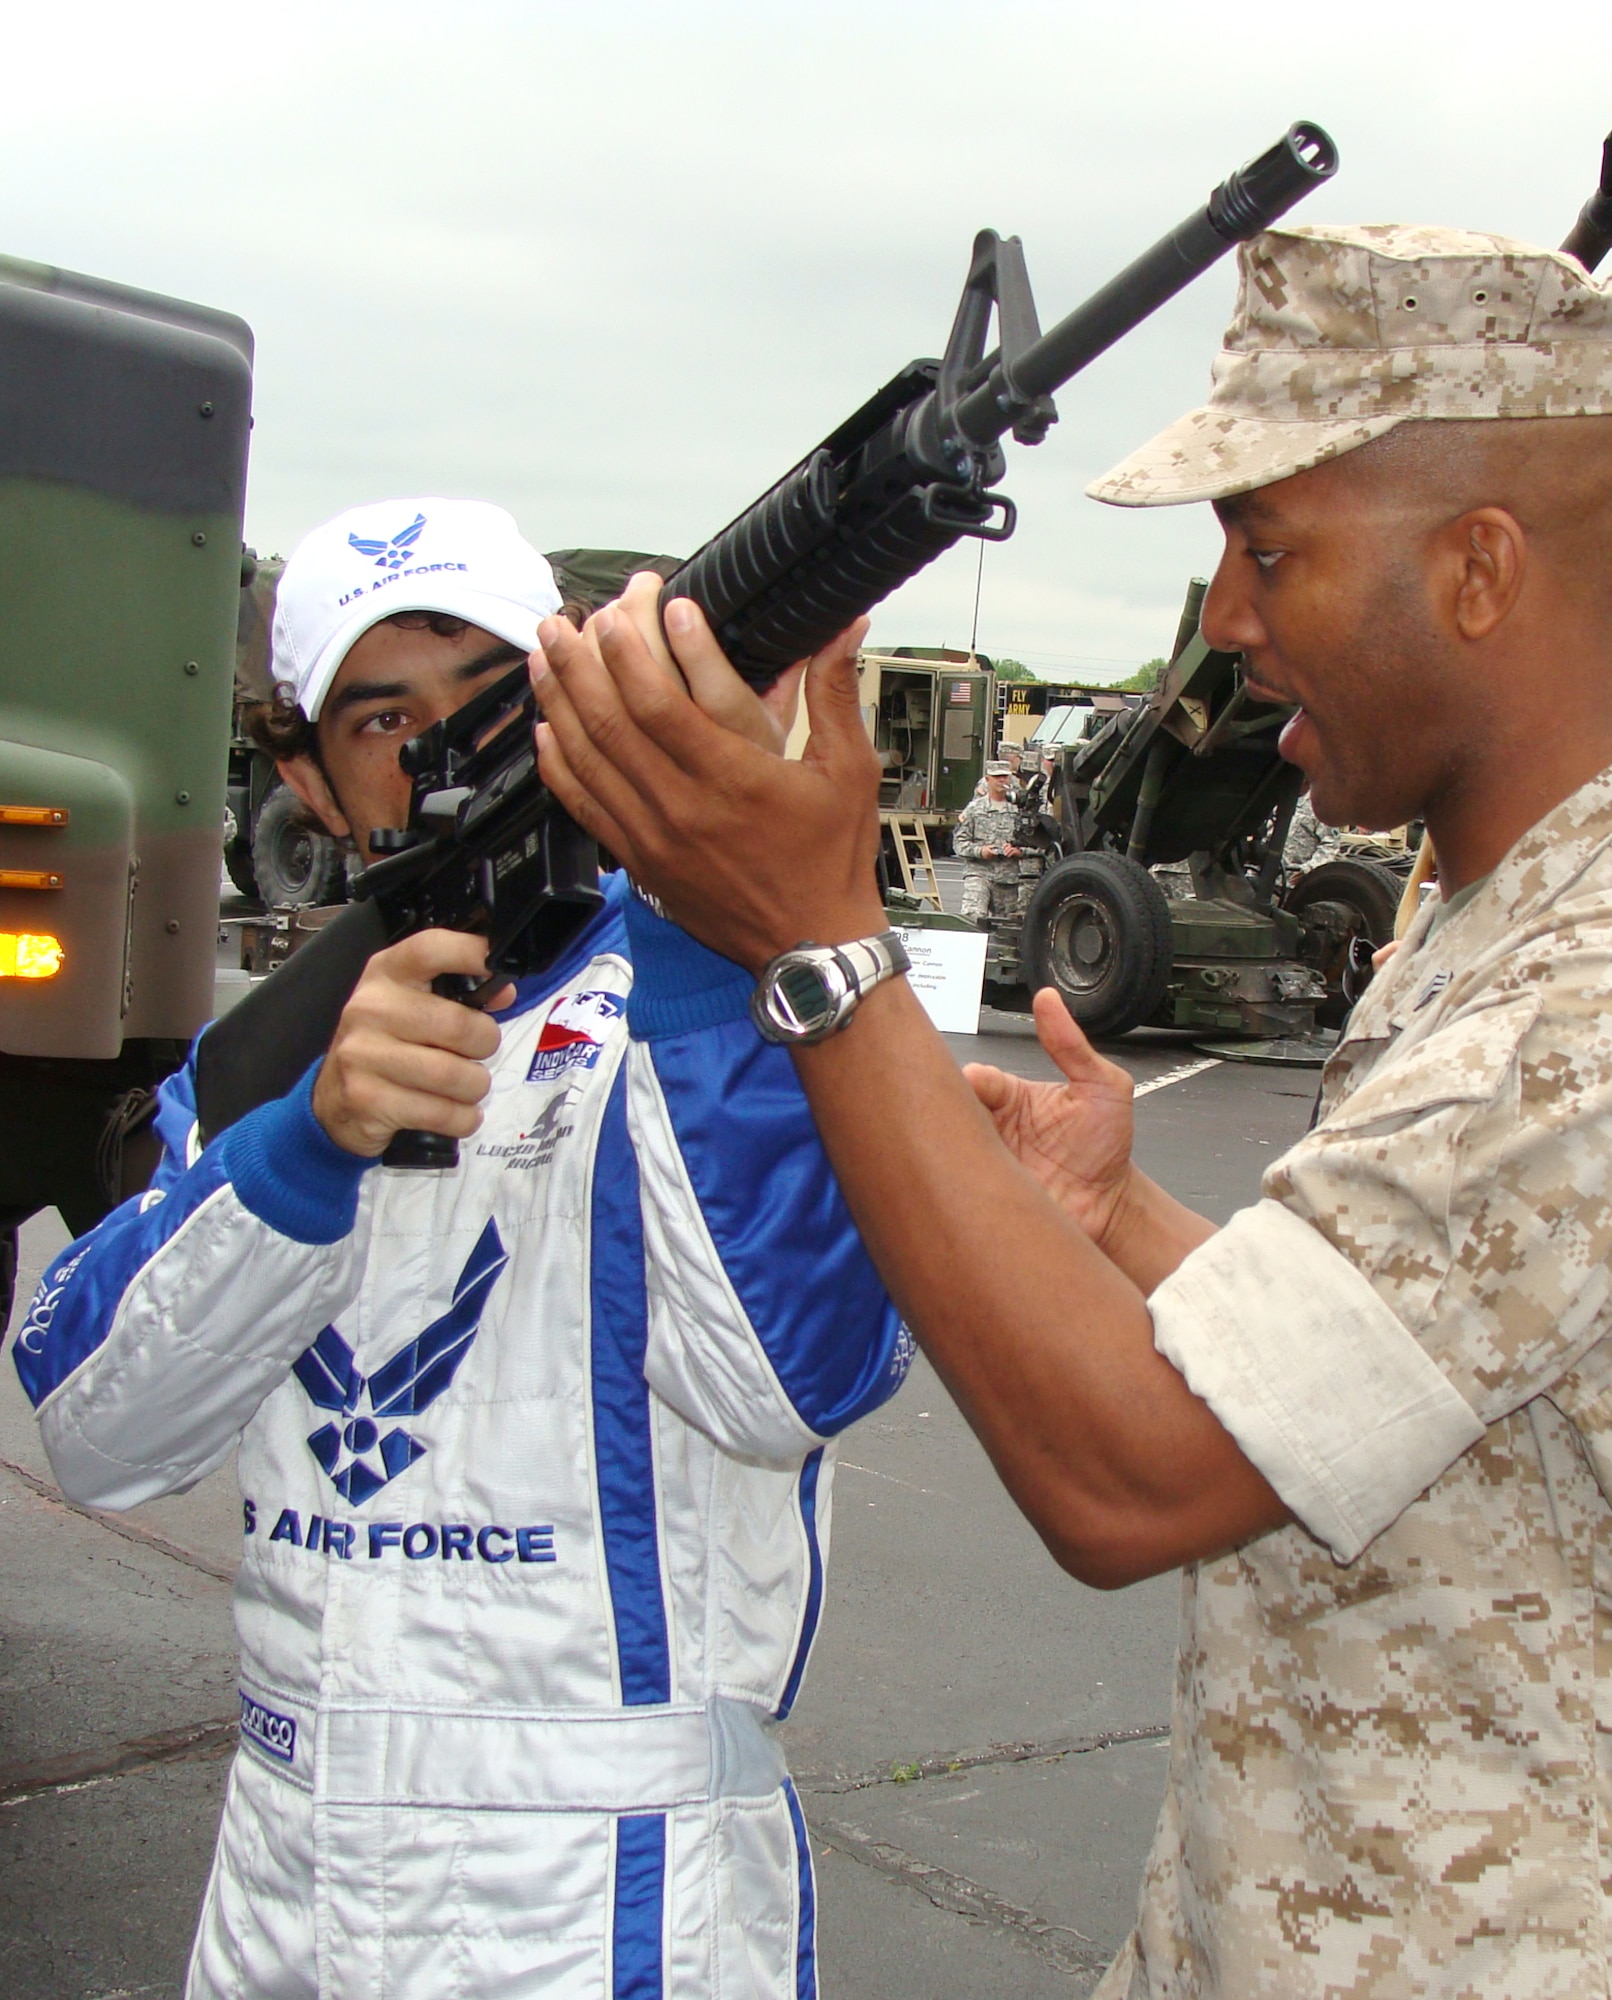 Luczo Dragon Racing No. 2 car driver Rafael Matos takes a few pointers from Indiana Marine Reservist Sgt. Gerrick Fallon May 16 at the Indianapolis Motor Speedway. Matos is driving the Air Force-themed Indy car in the Indianapolis 500 May 24 after qualifying 12th with the fastest time of five rookies in the field. The speedway recognizes the contributions of military men and women annually as each of the services display equipment and static aircraft for race fans to see during Armed Forces Day weekend. (U.S. Air Force photo/Daniel Elkins) 